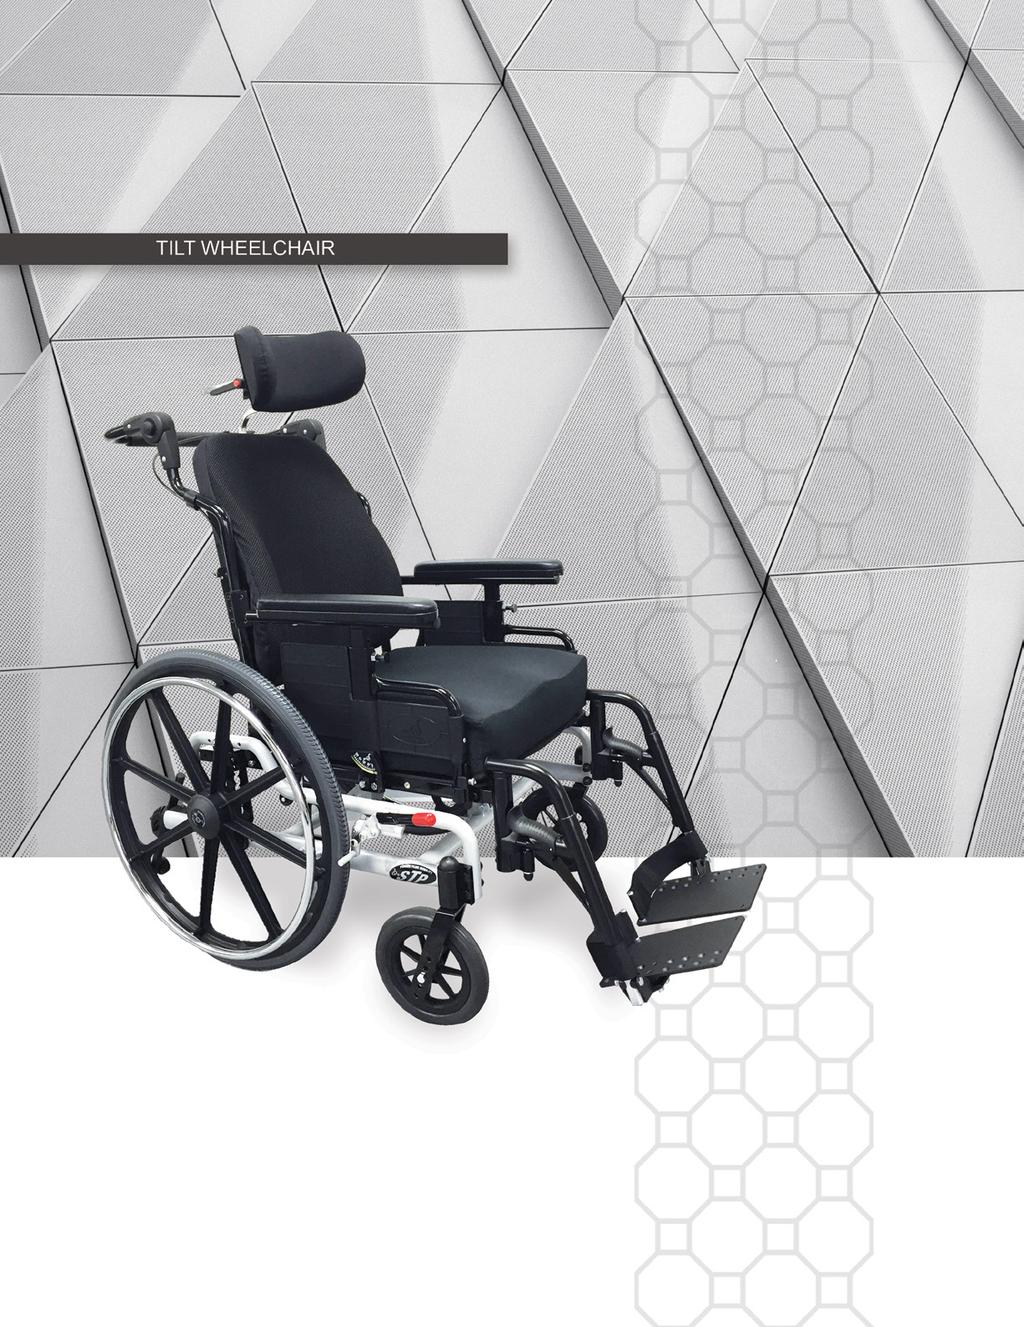 STP super tilt plus One of Power Plus Mobility s best selling wheelchairs. The STP is a light weight tilt chair designed for adjustment and maneuverability.